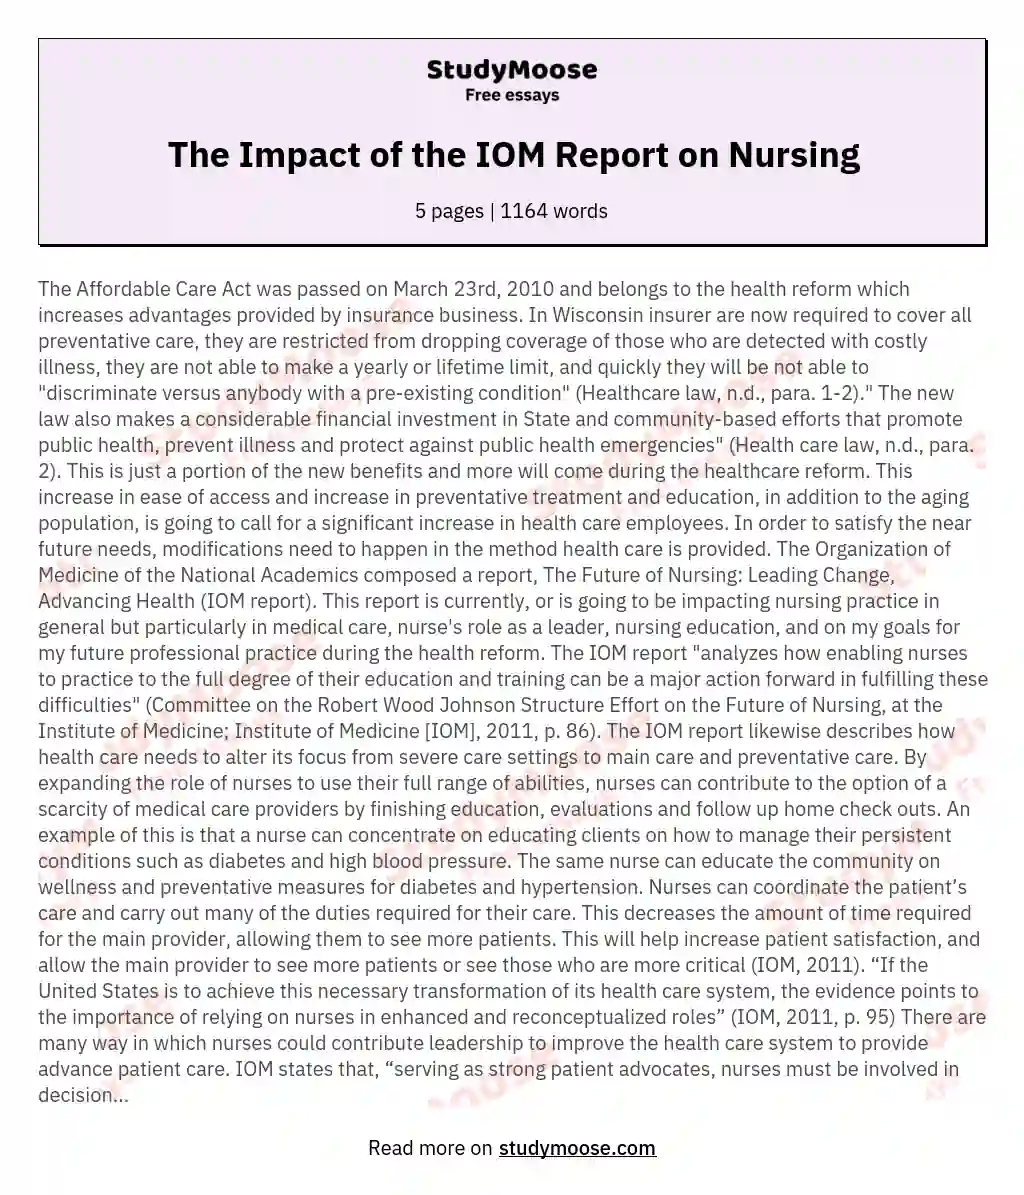 The Impact of the IOM Report on Nursing essay